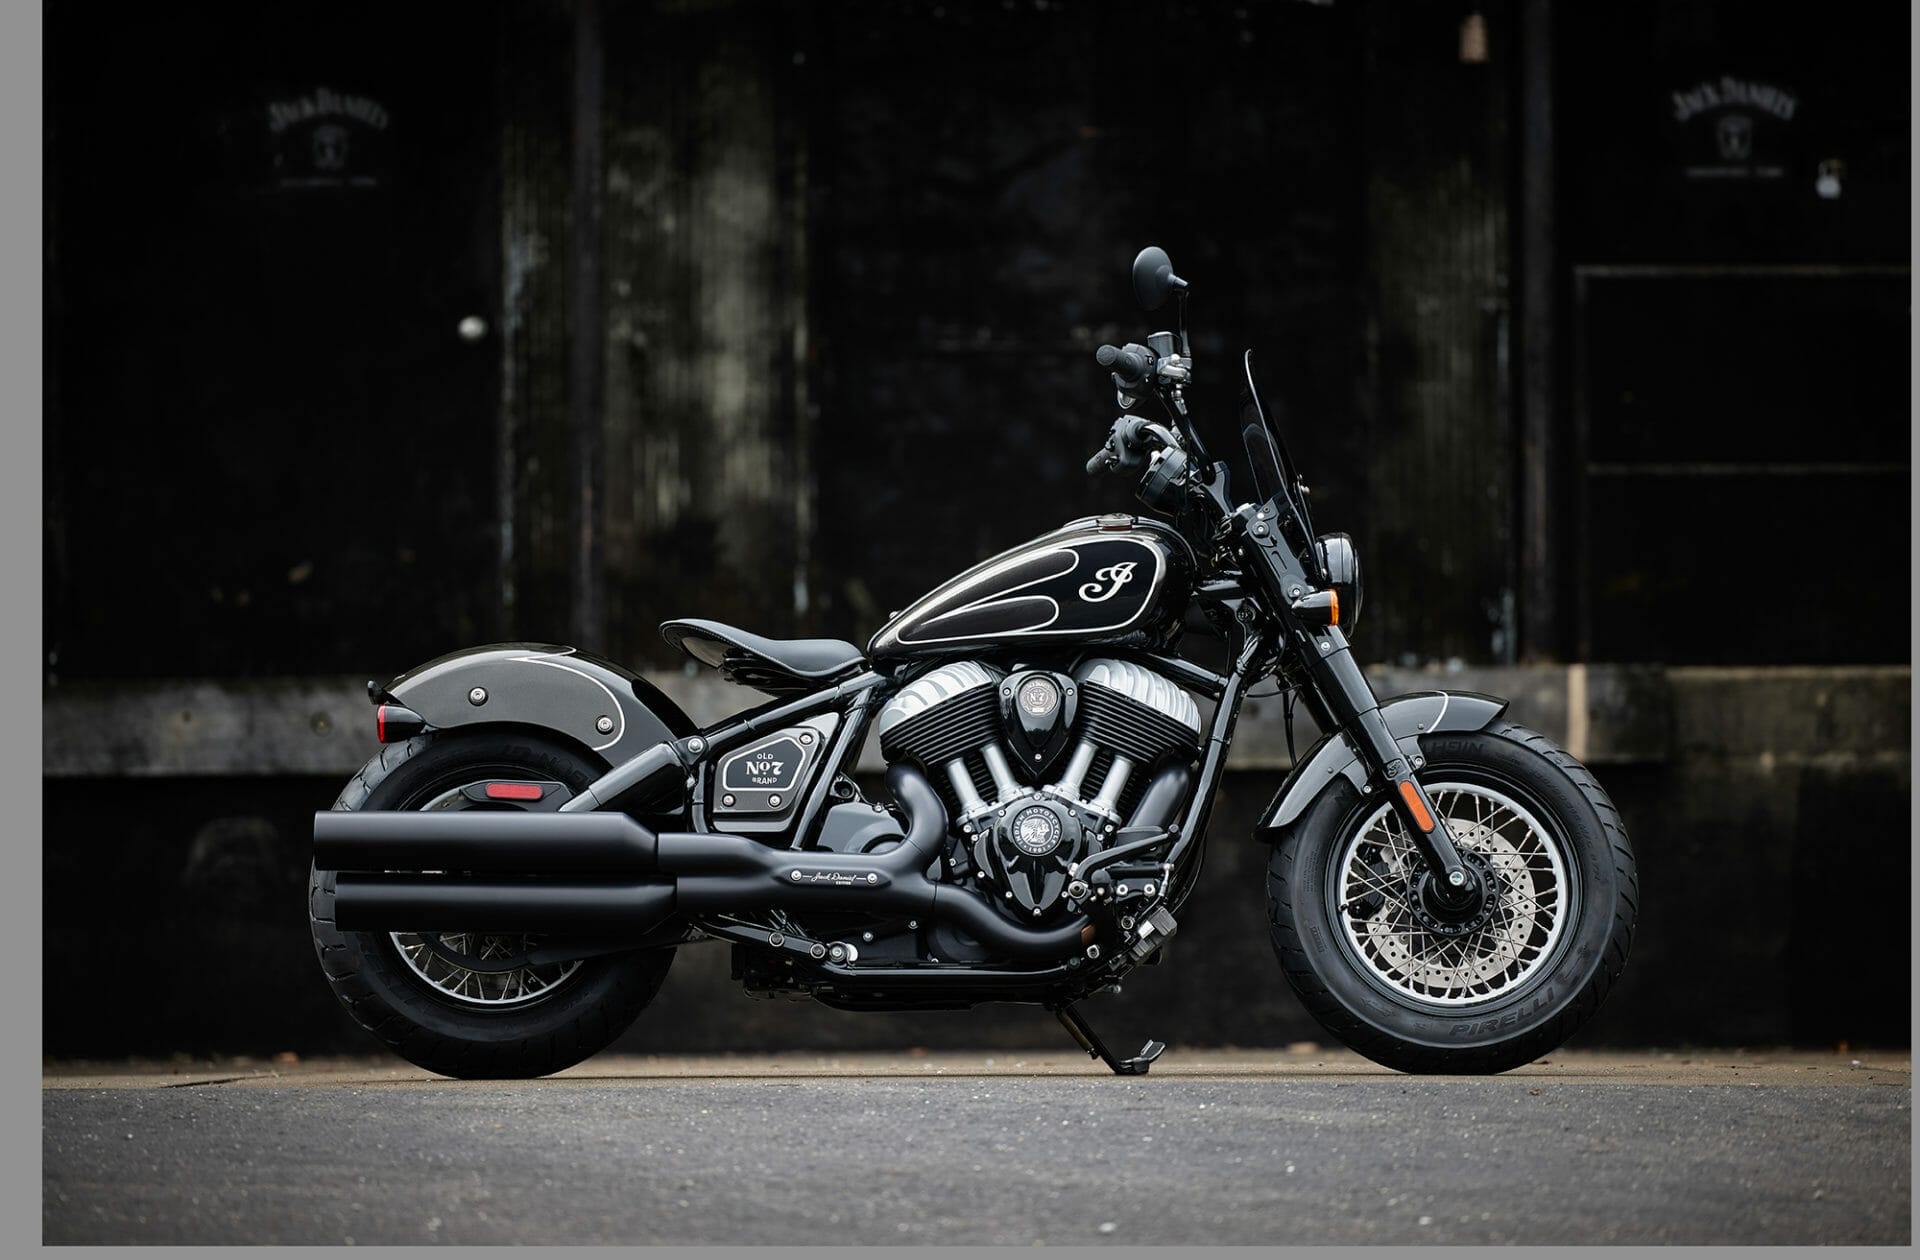 Jack Daniel’s Limited Edition Indian Chief Bobber Dark Horse: A tribute to American craftsmanship